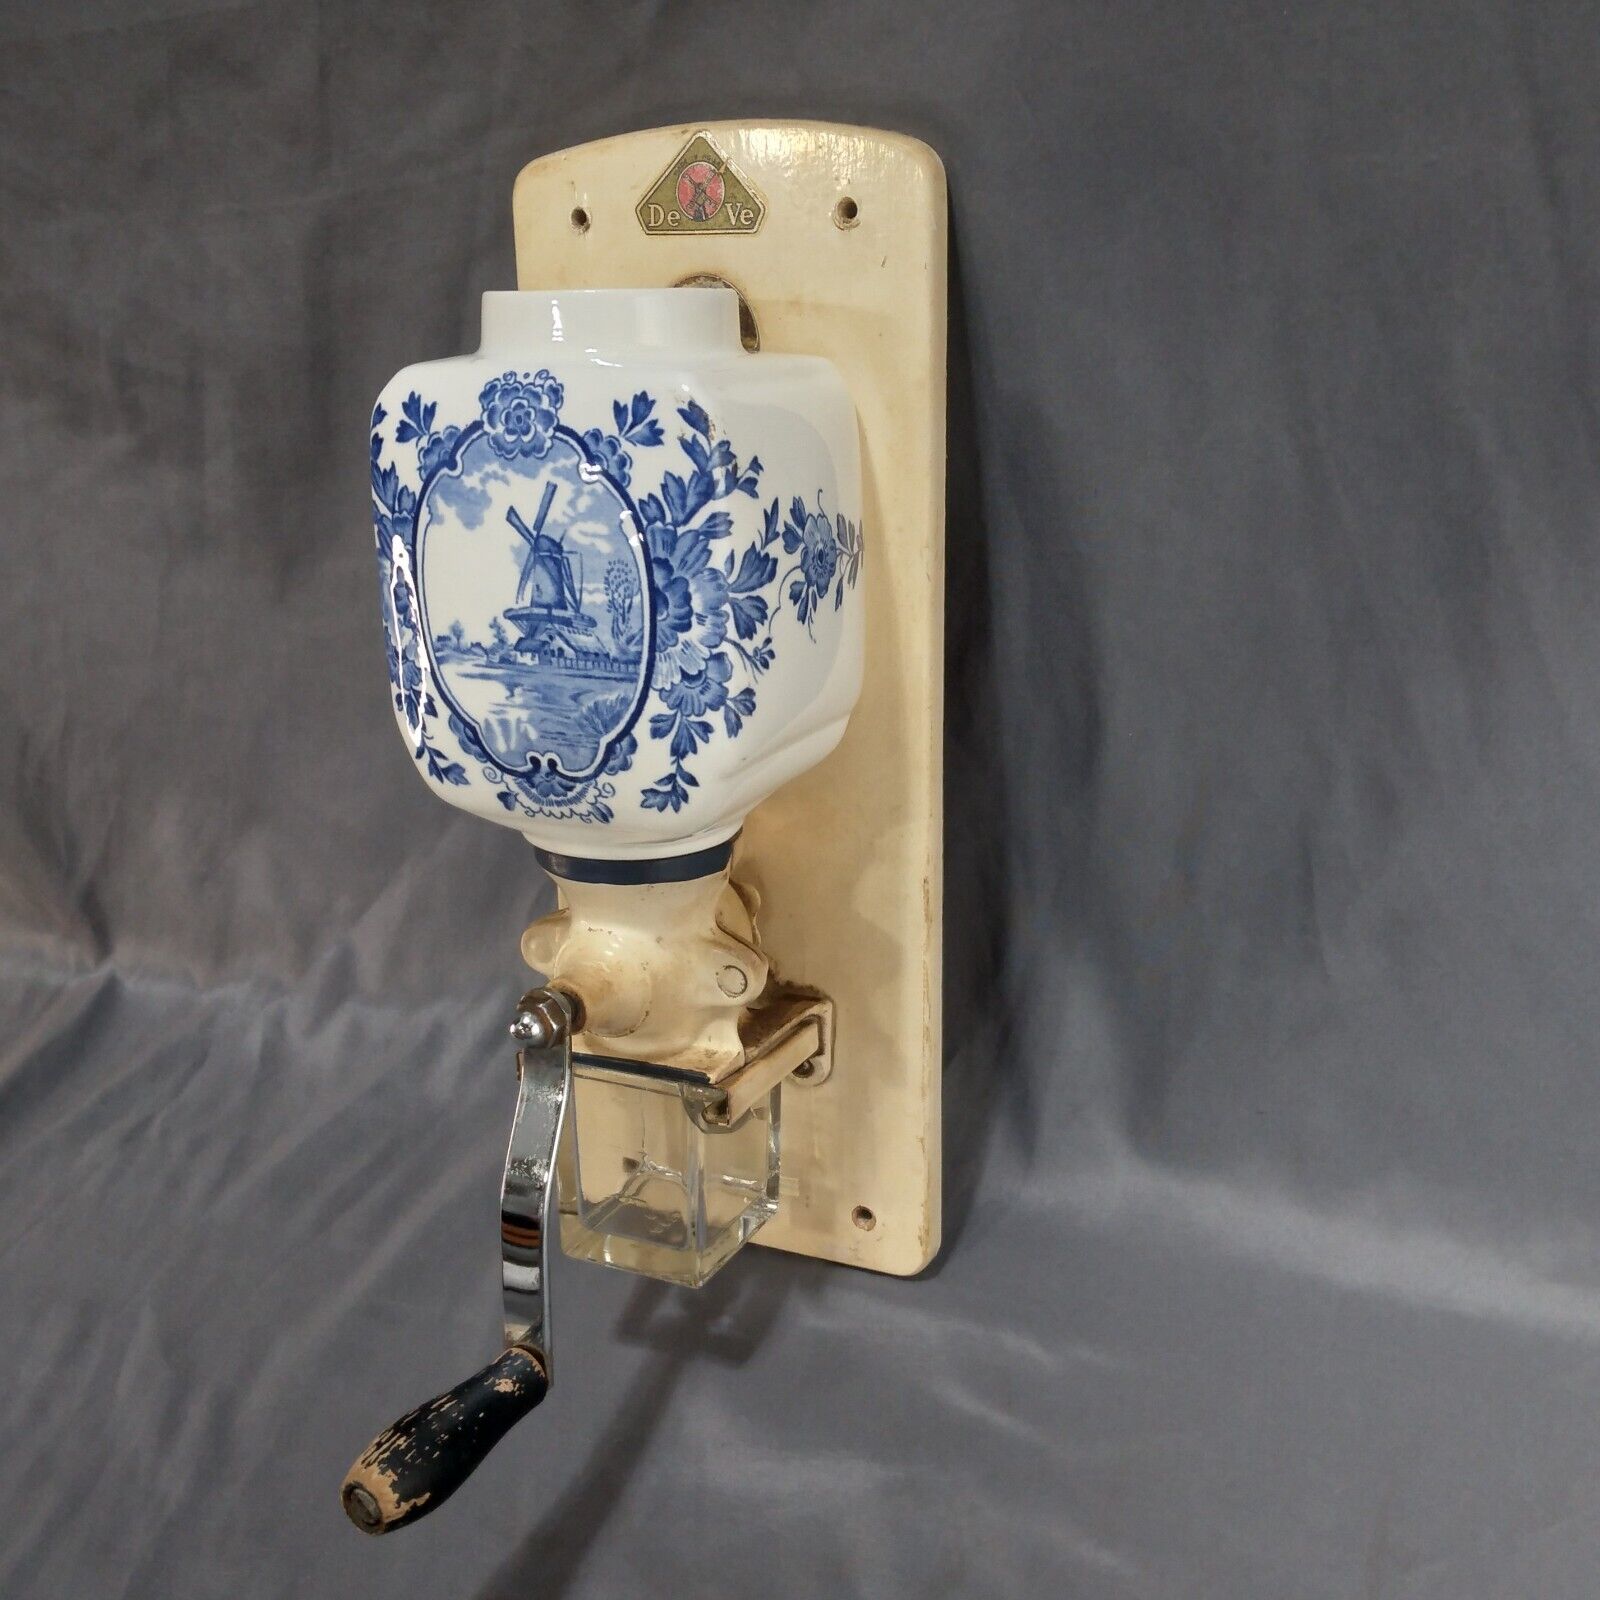 Vintage Coffee Grinder De Ve Holland Blue Delft Windmill Wall Mount Coffee Mill